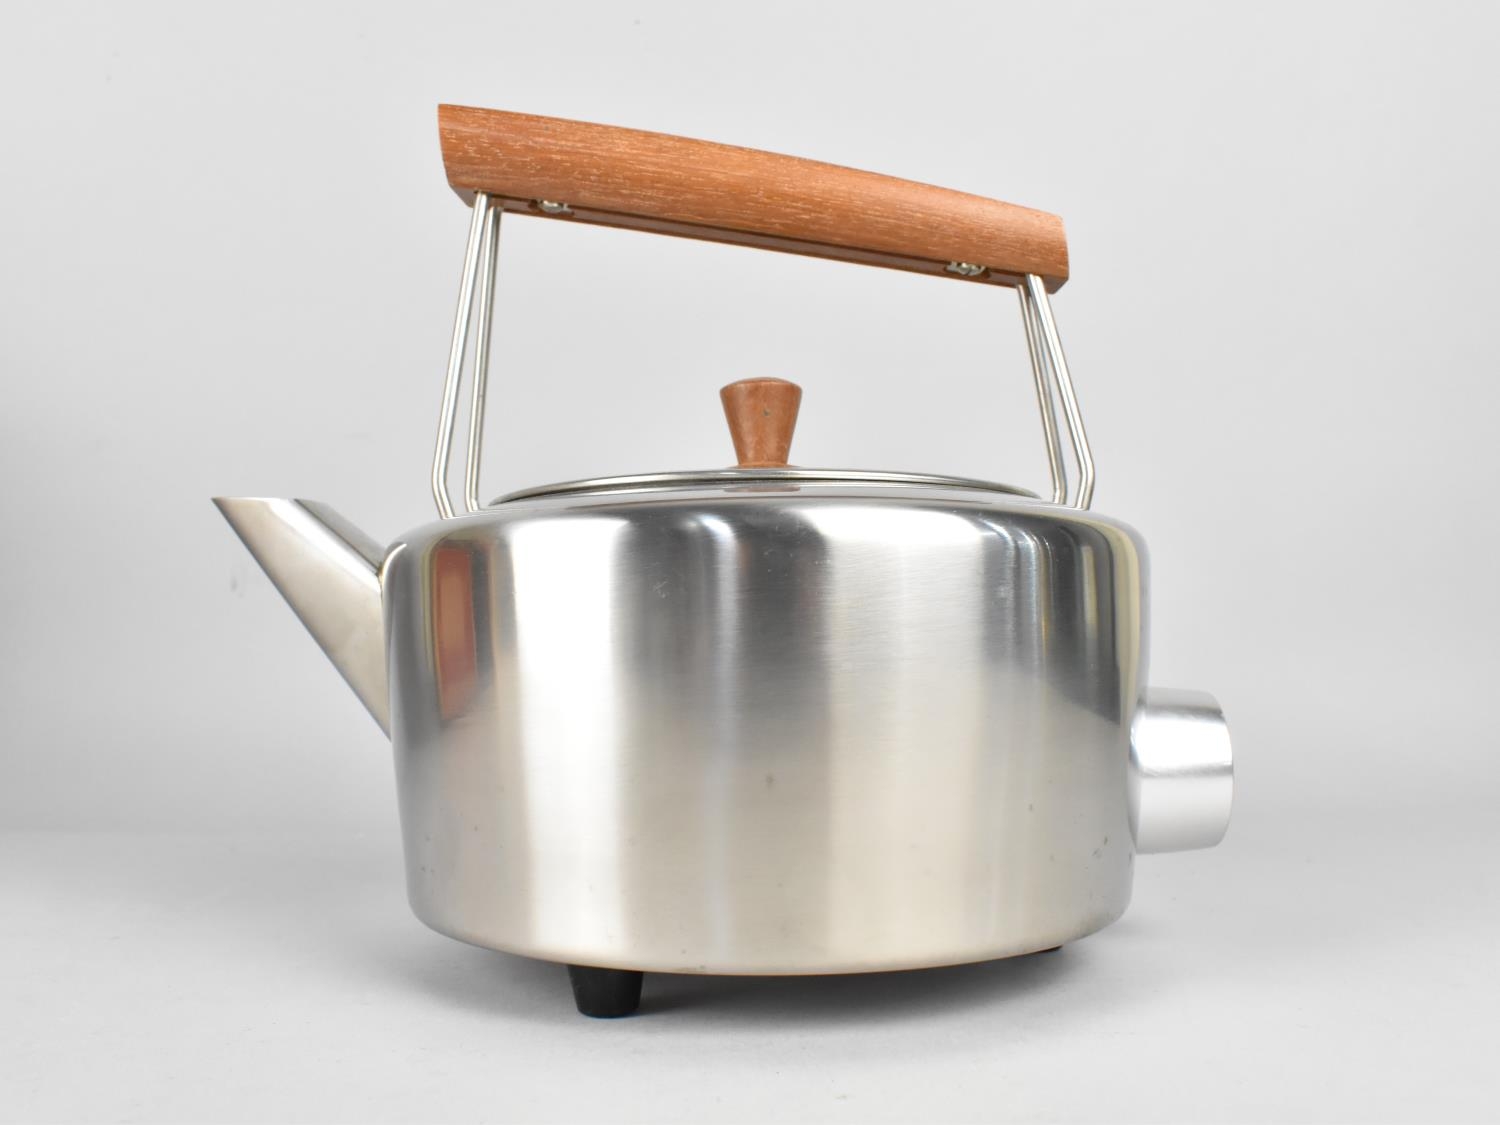 A c.1970s Stainless Steel Electric Kettle by Hoover, Model 6204, with Box